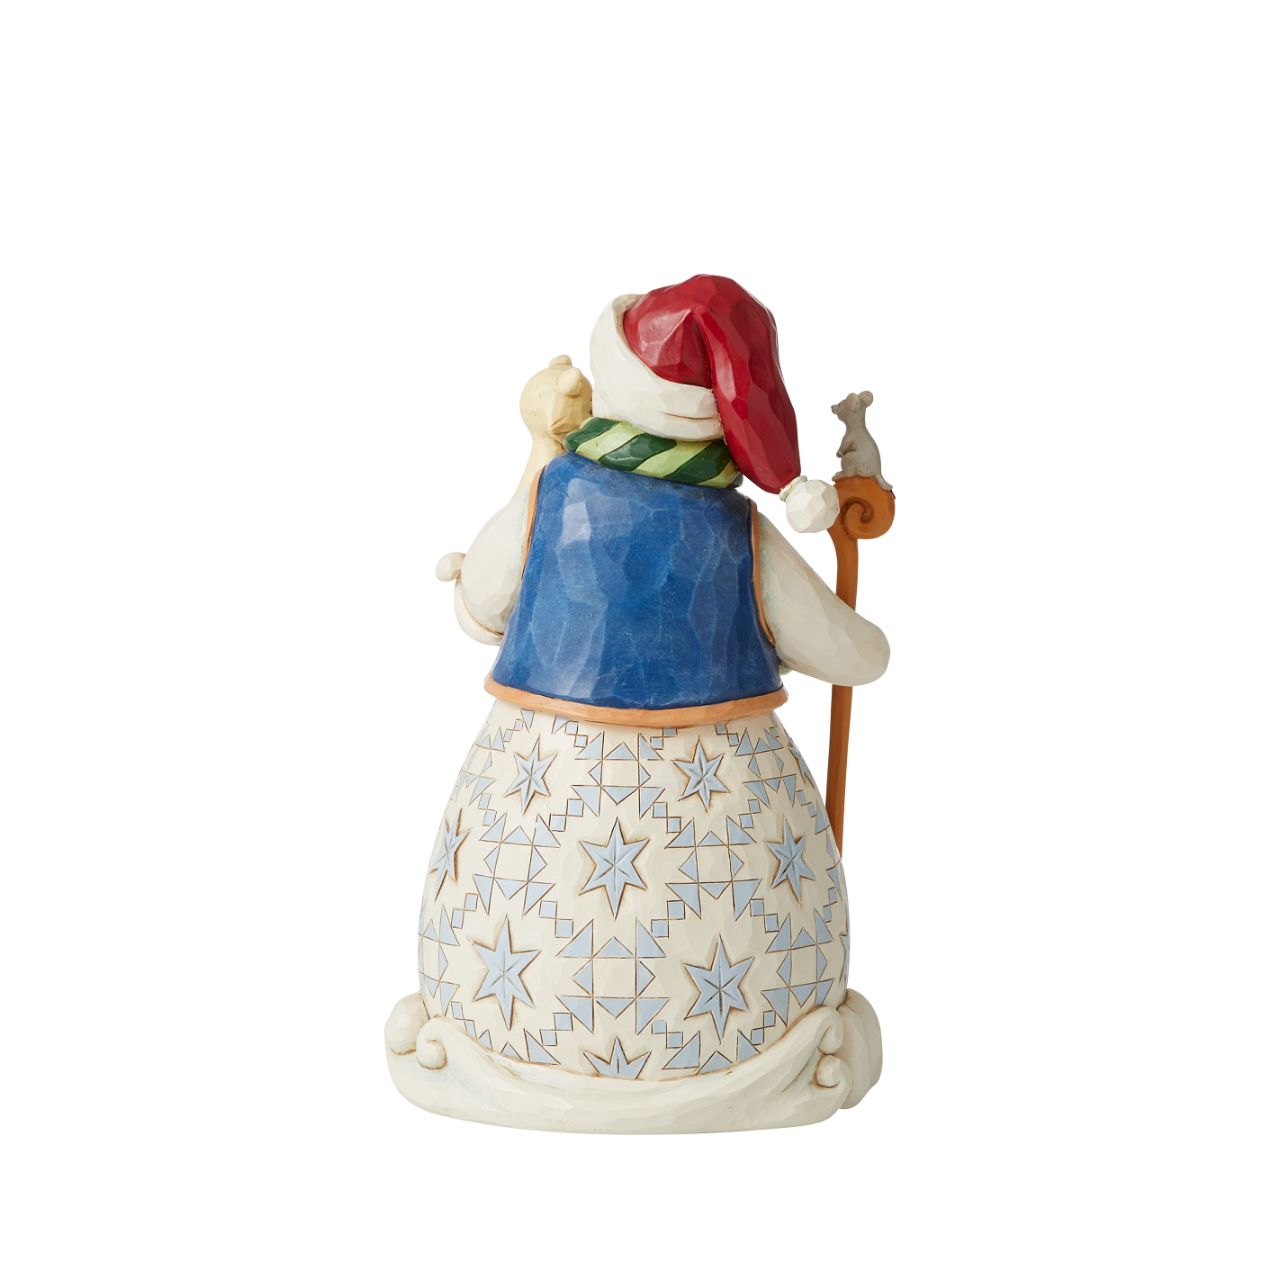 Jim Shore Heartwood Creek Christmas Snowman Holding Cat Figurine  "Chase a happy Holiday" Created in the iconic Heartwood Creek style, Jim Shore has designed a piece to celebrate both friendship and animal lovers all over.